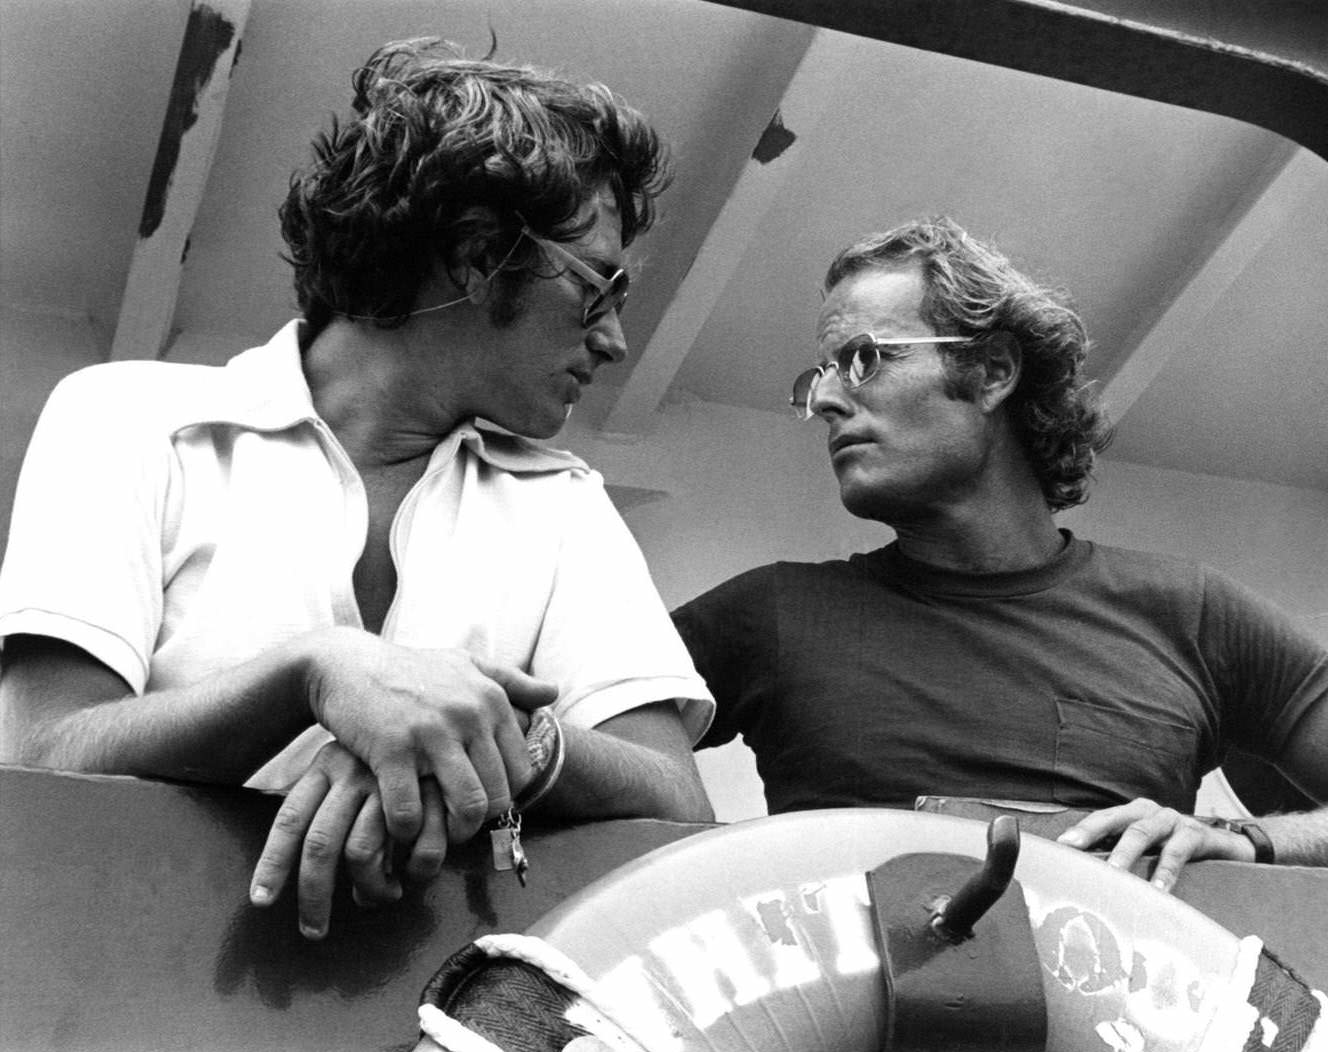 Martha's Vineyard, and Director Steven Spielberg and producer Richard Zanuck on the set of the Universal Pictures production of 'Jaws' in 1975 in Martha's Vineyard, Massachusetts.